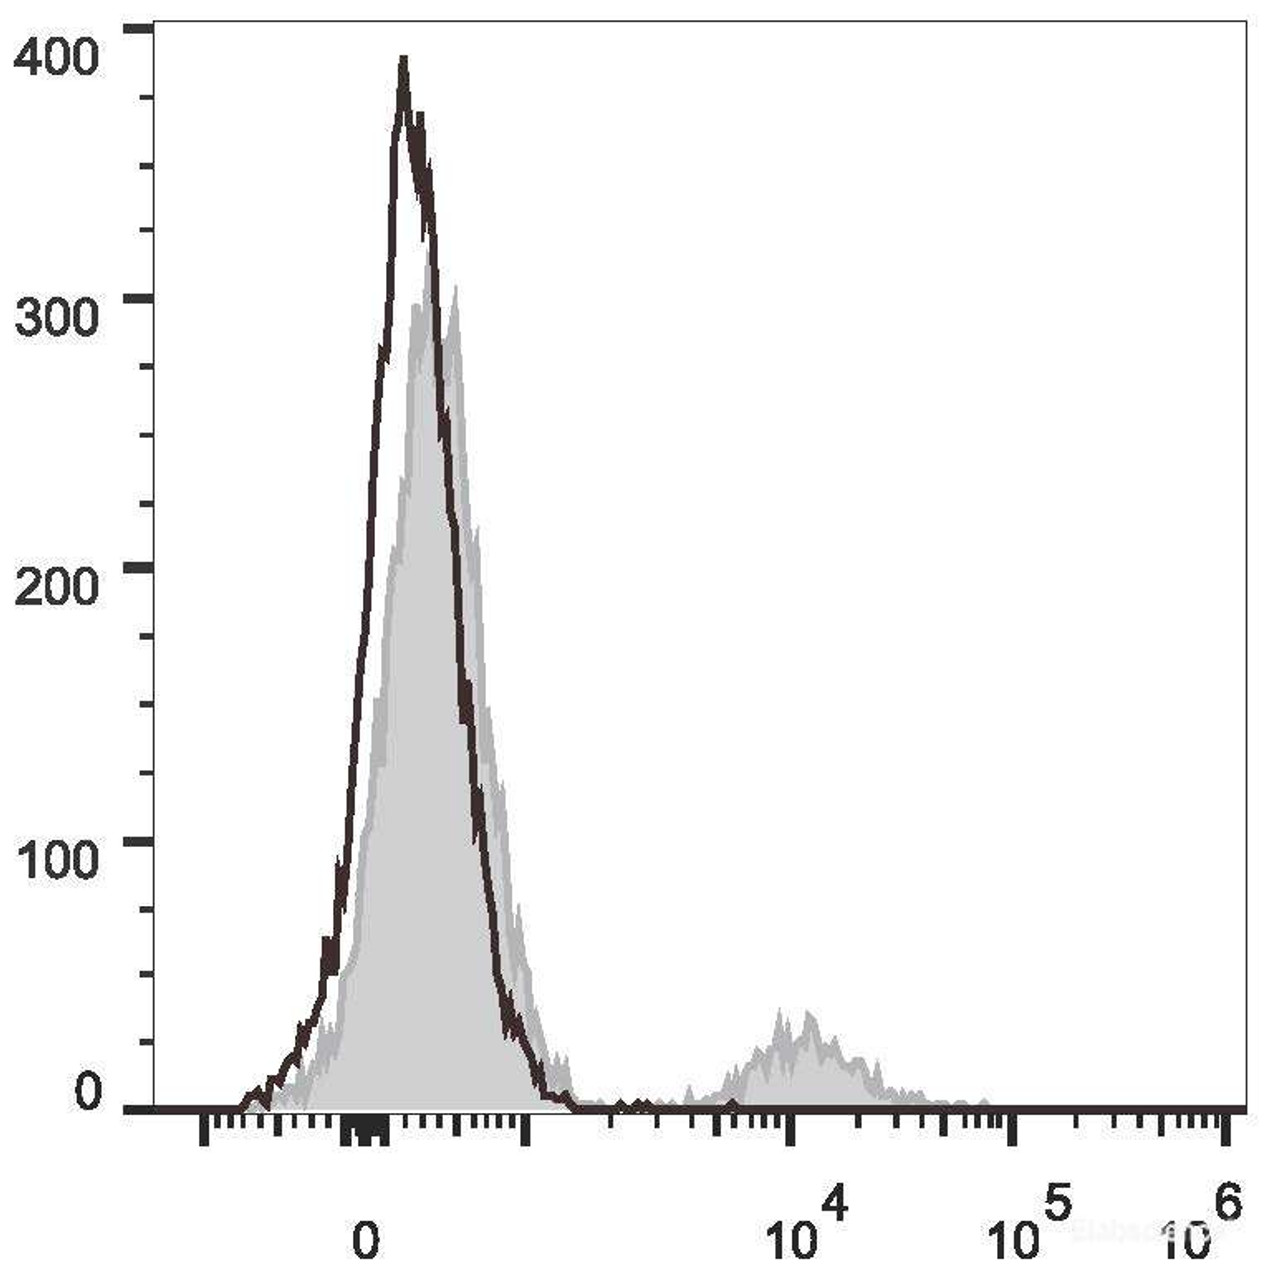 Human peripheral blood lymphocytes are stained with Anti-Human CD2 Monoclonal Antibody(PerCP/Cyanine5.5 Conjugated)(filled gray histogram). Unstained lymphocytes (empty black histogram) are used as control.